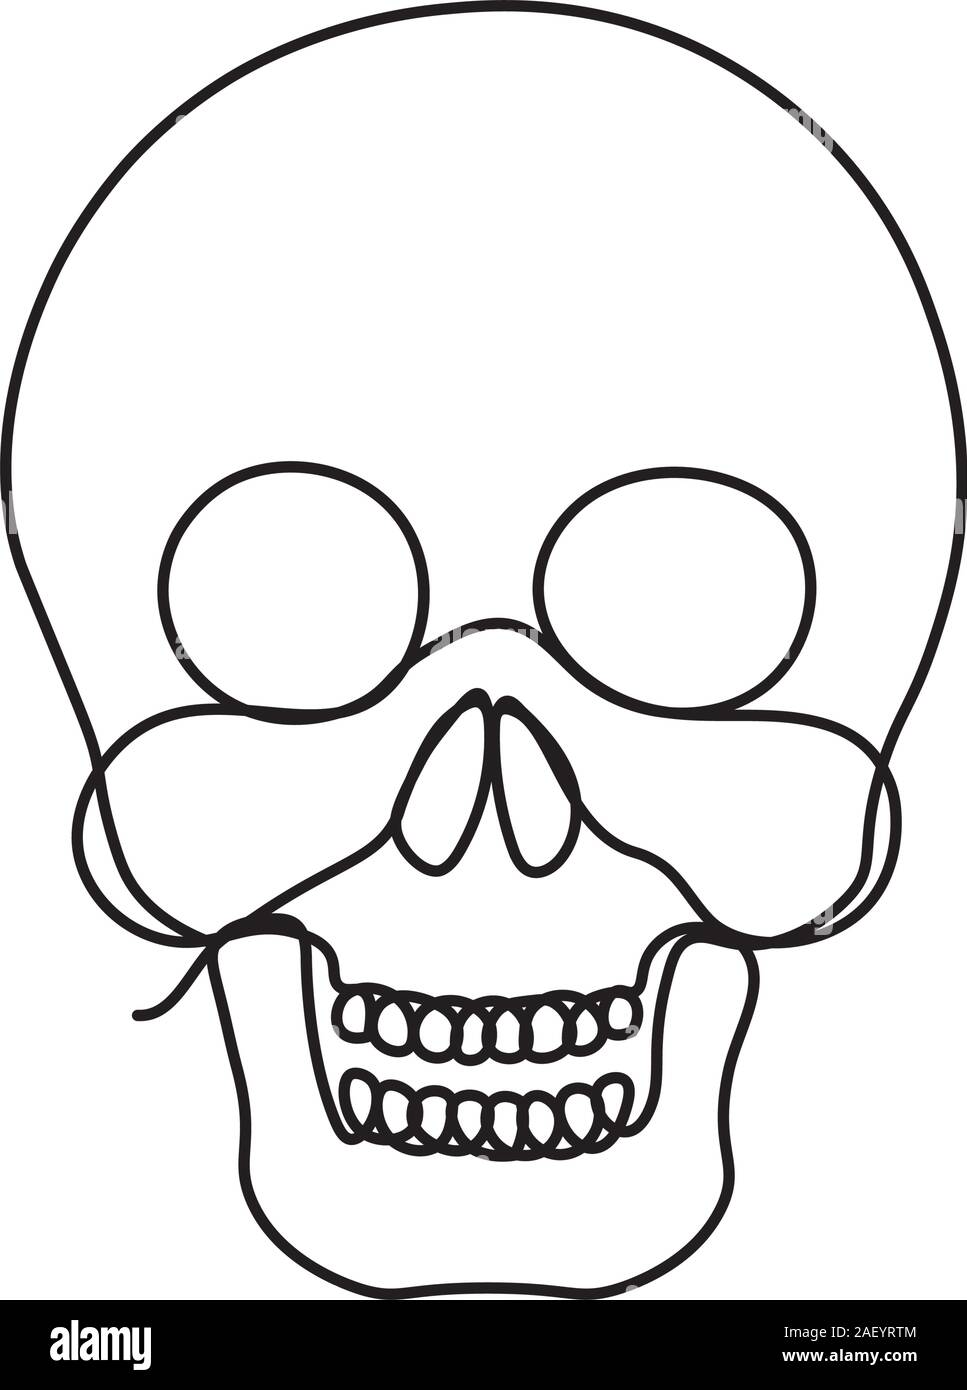 Human skull continuous single line style Stock Vector